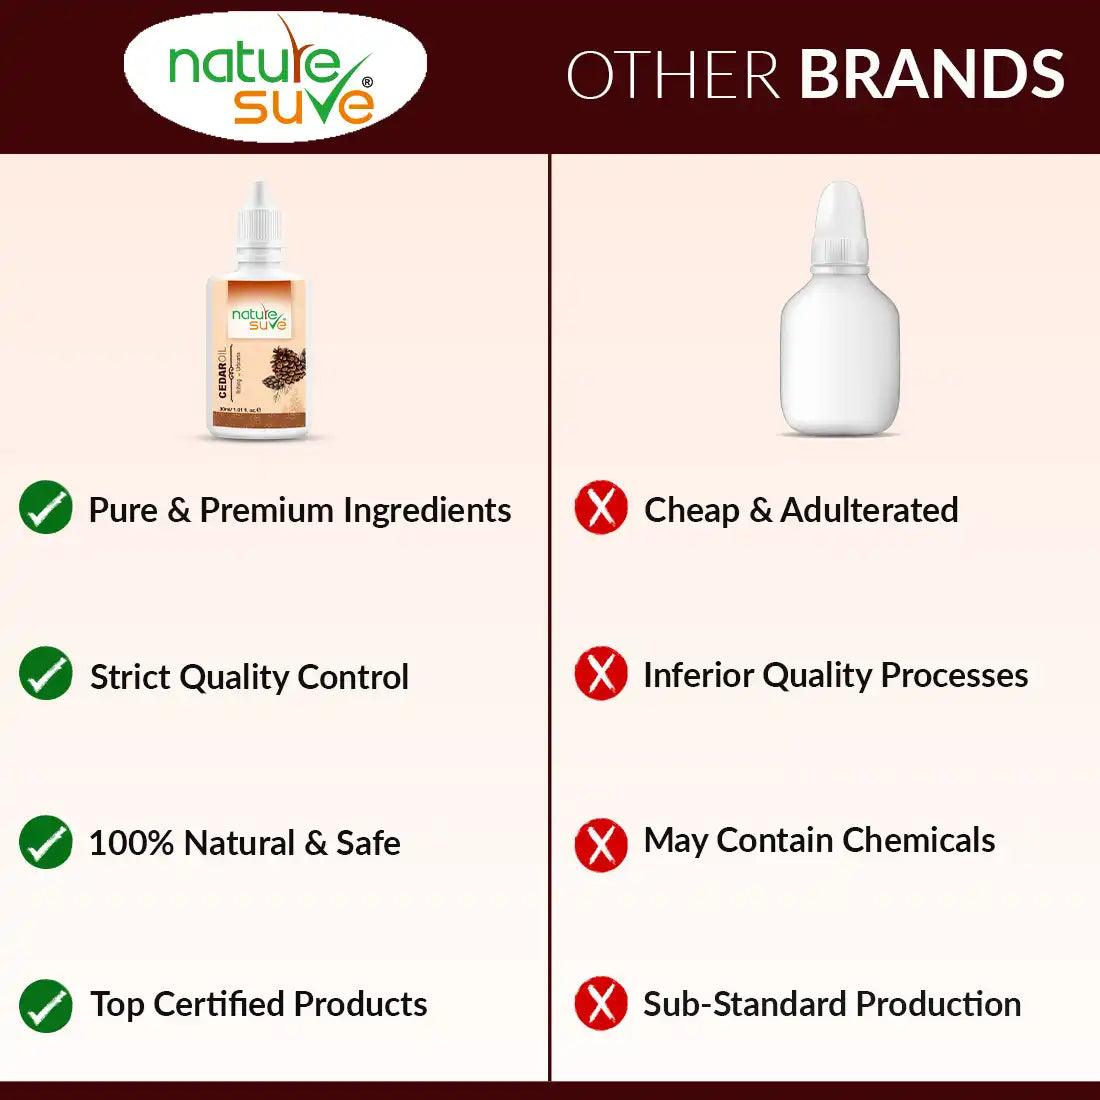 Nature Sure Offers Premium Natural Wellness Products Made From Pure Ingredients - everteen-neud.com